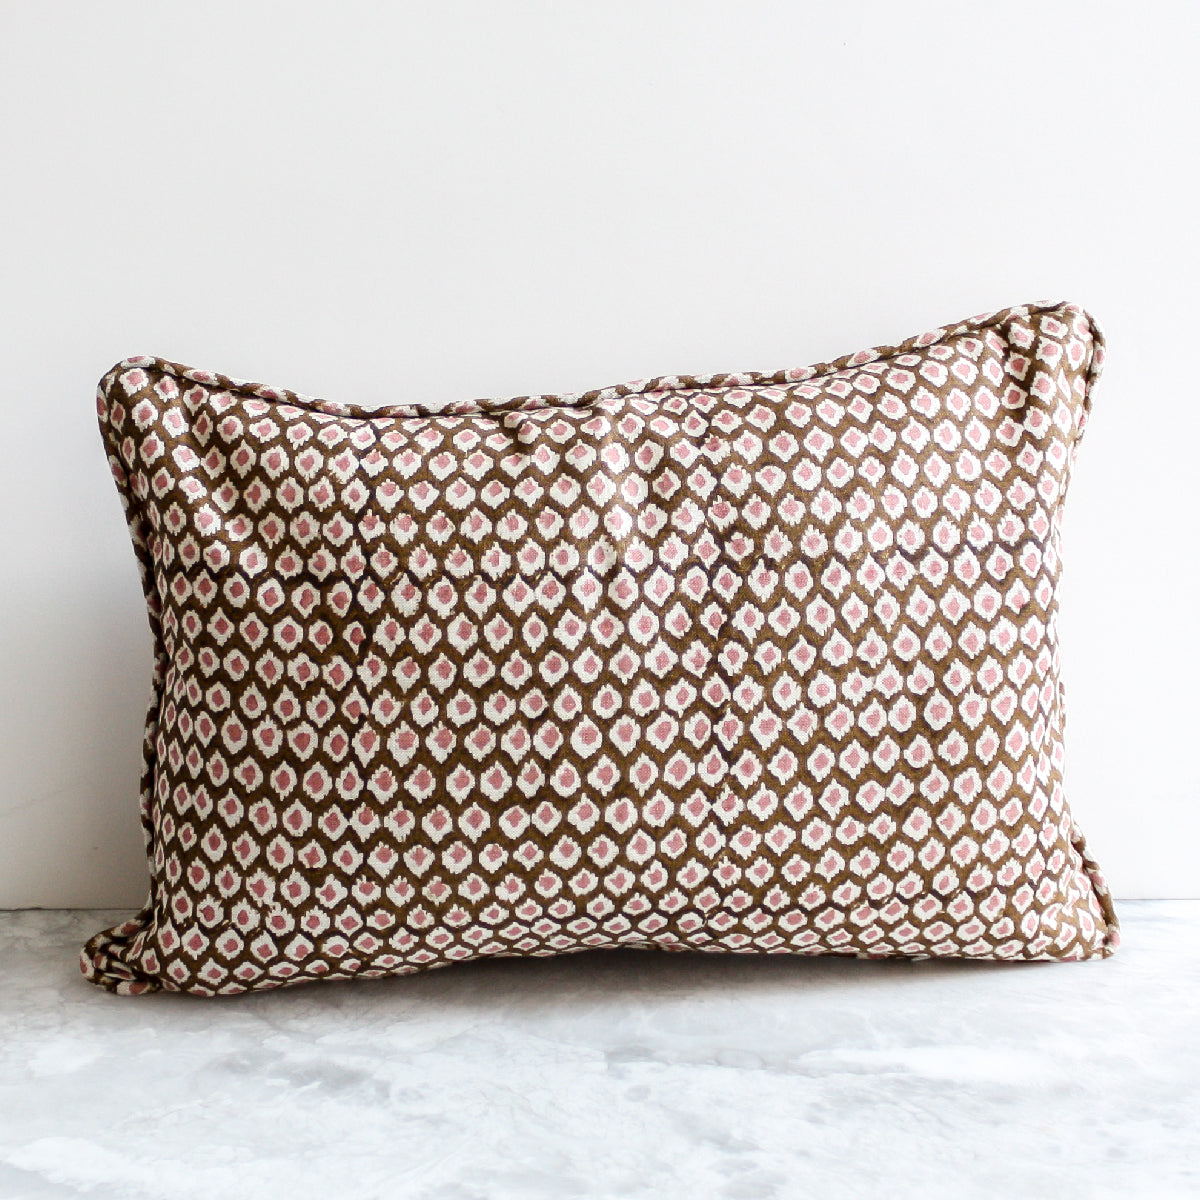 Patola Musk Lumbar Pillow hand block printed in brown and pink by Walter G Textiles